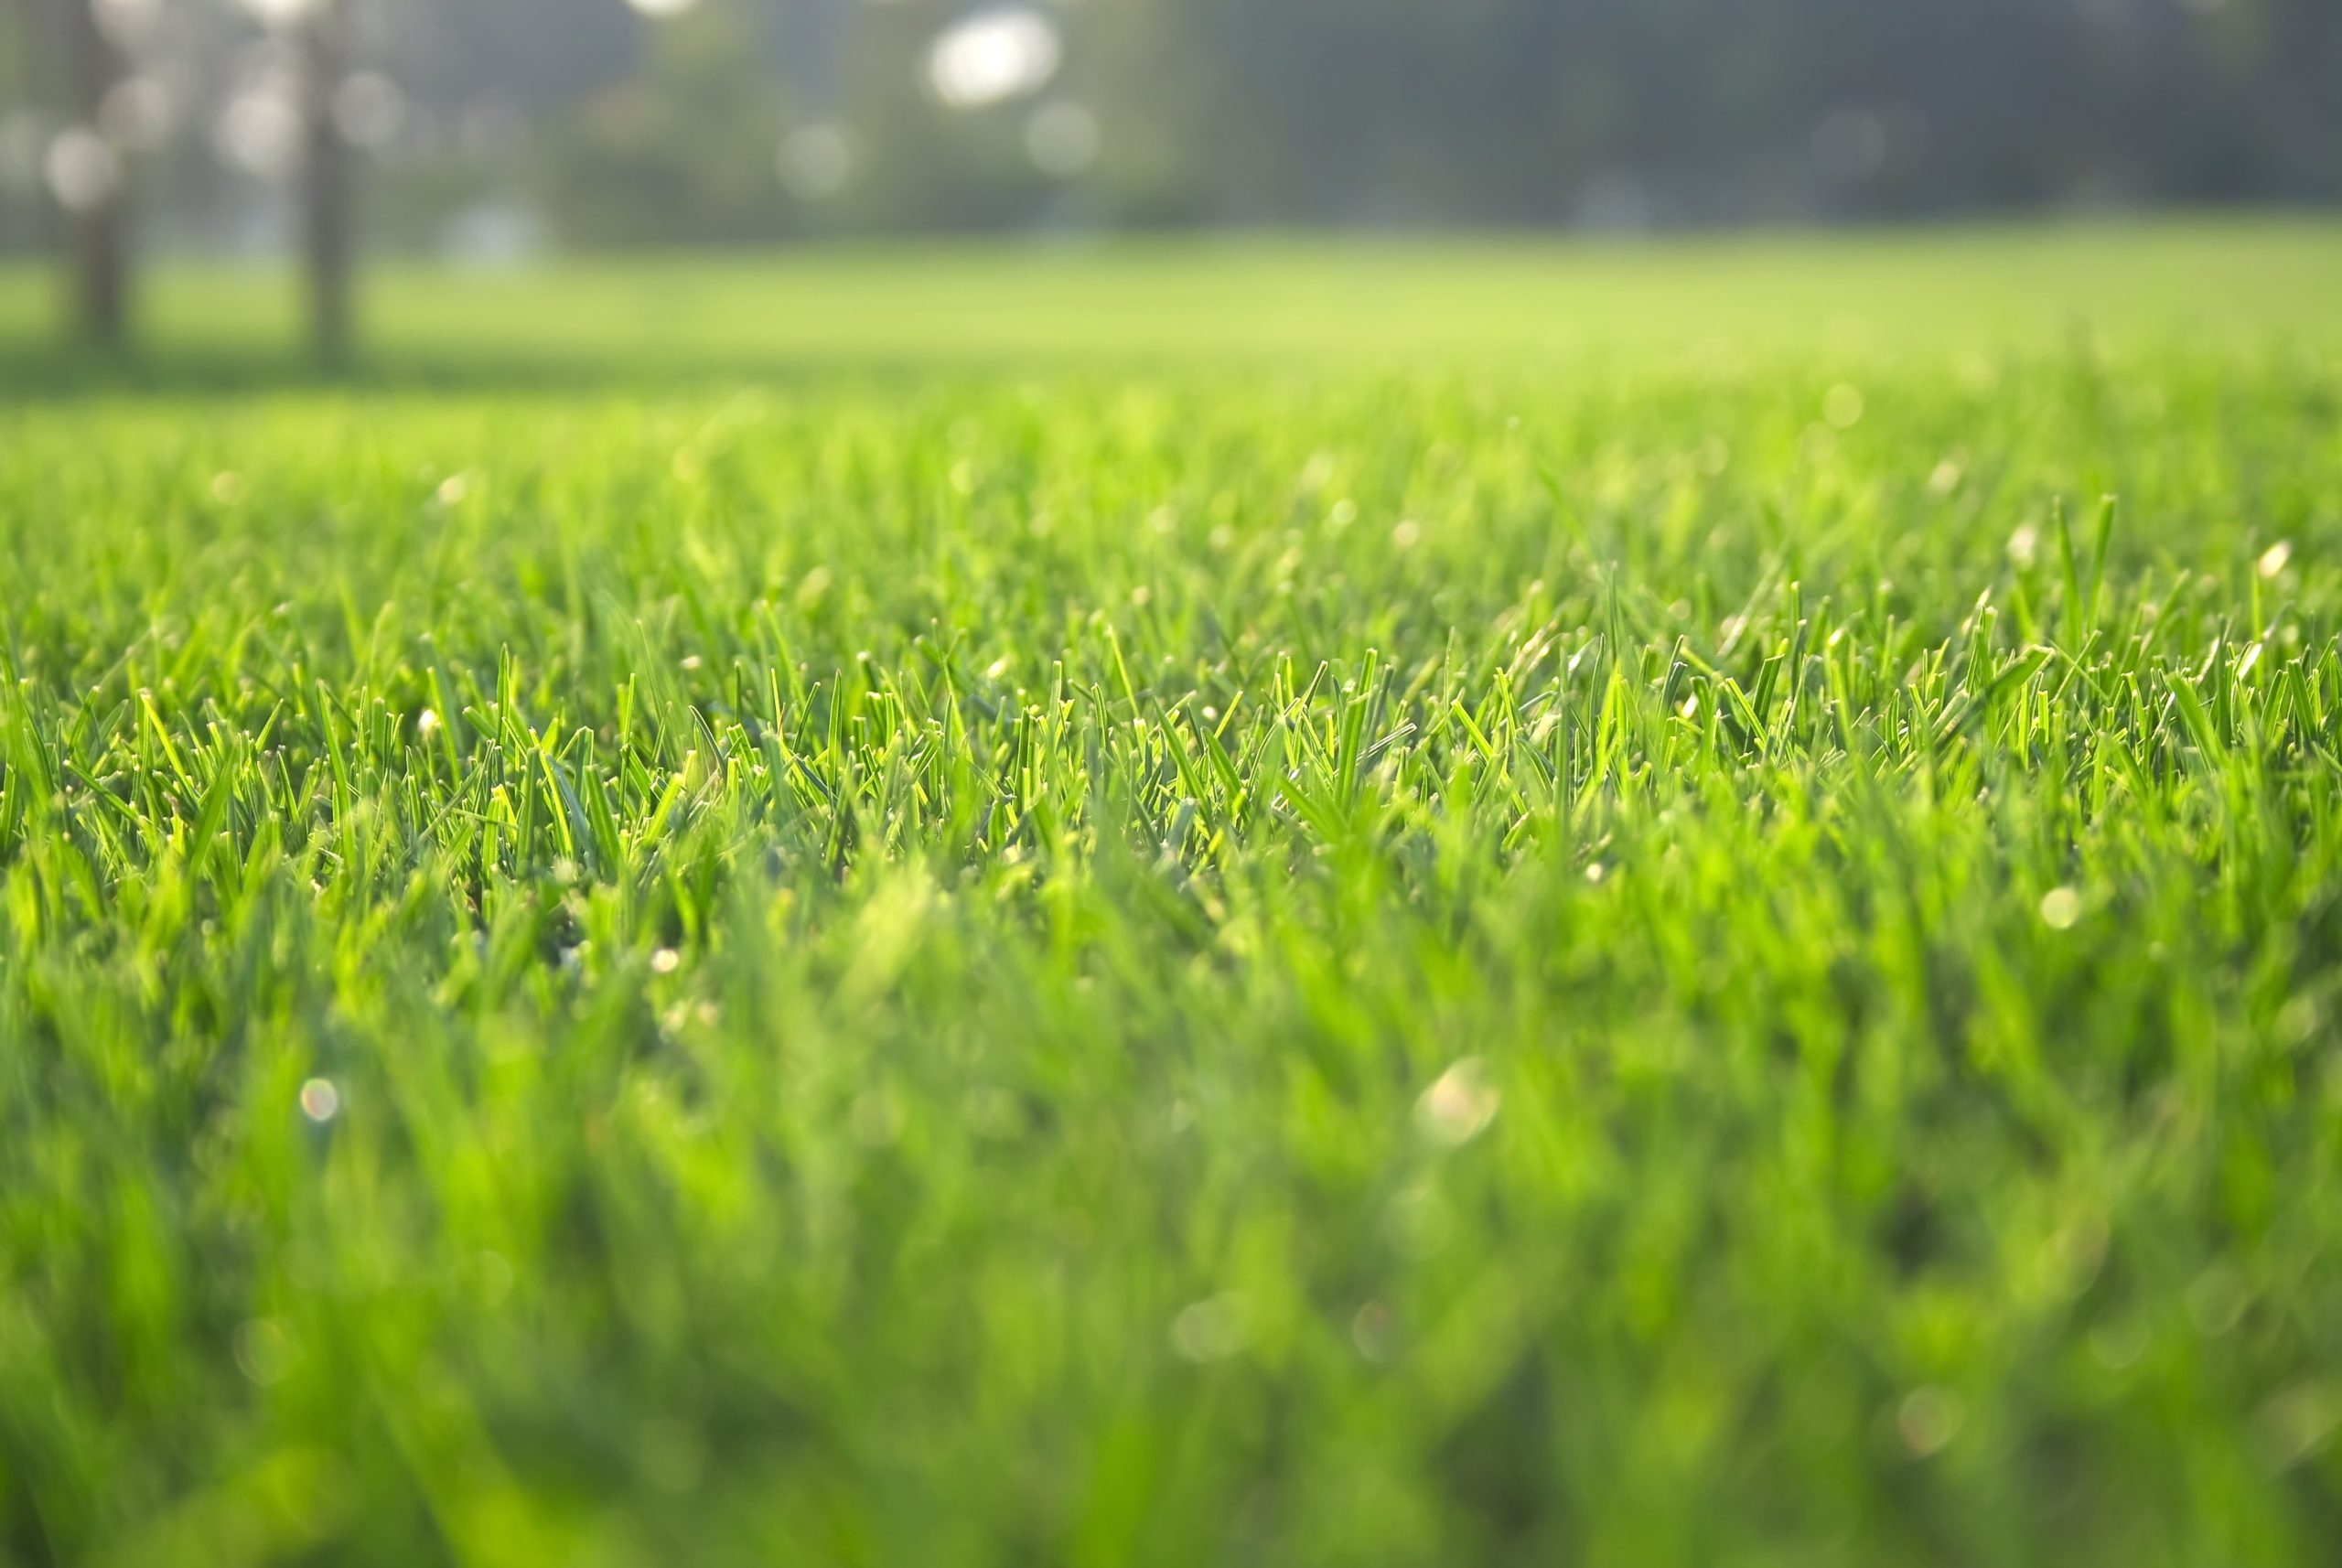 Keep Your Property Looking Great with Lawn Care Weed Control in Sellersburg, IN